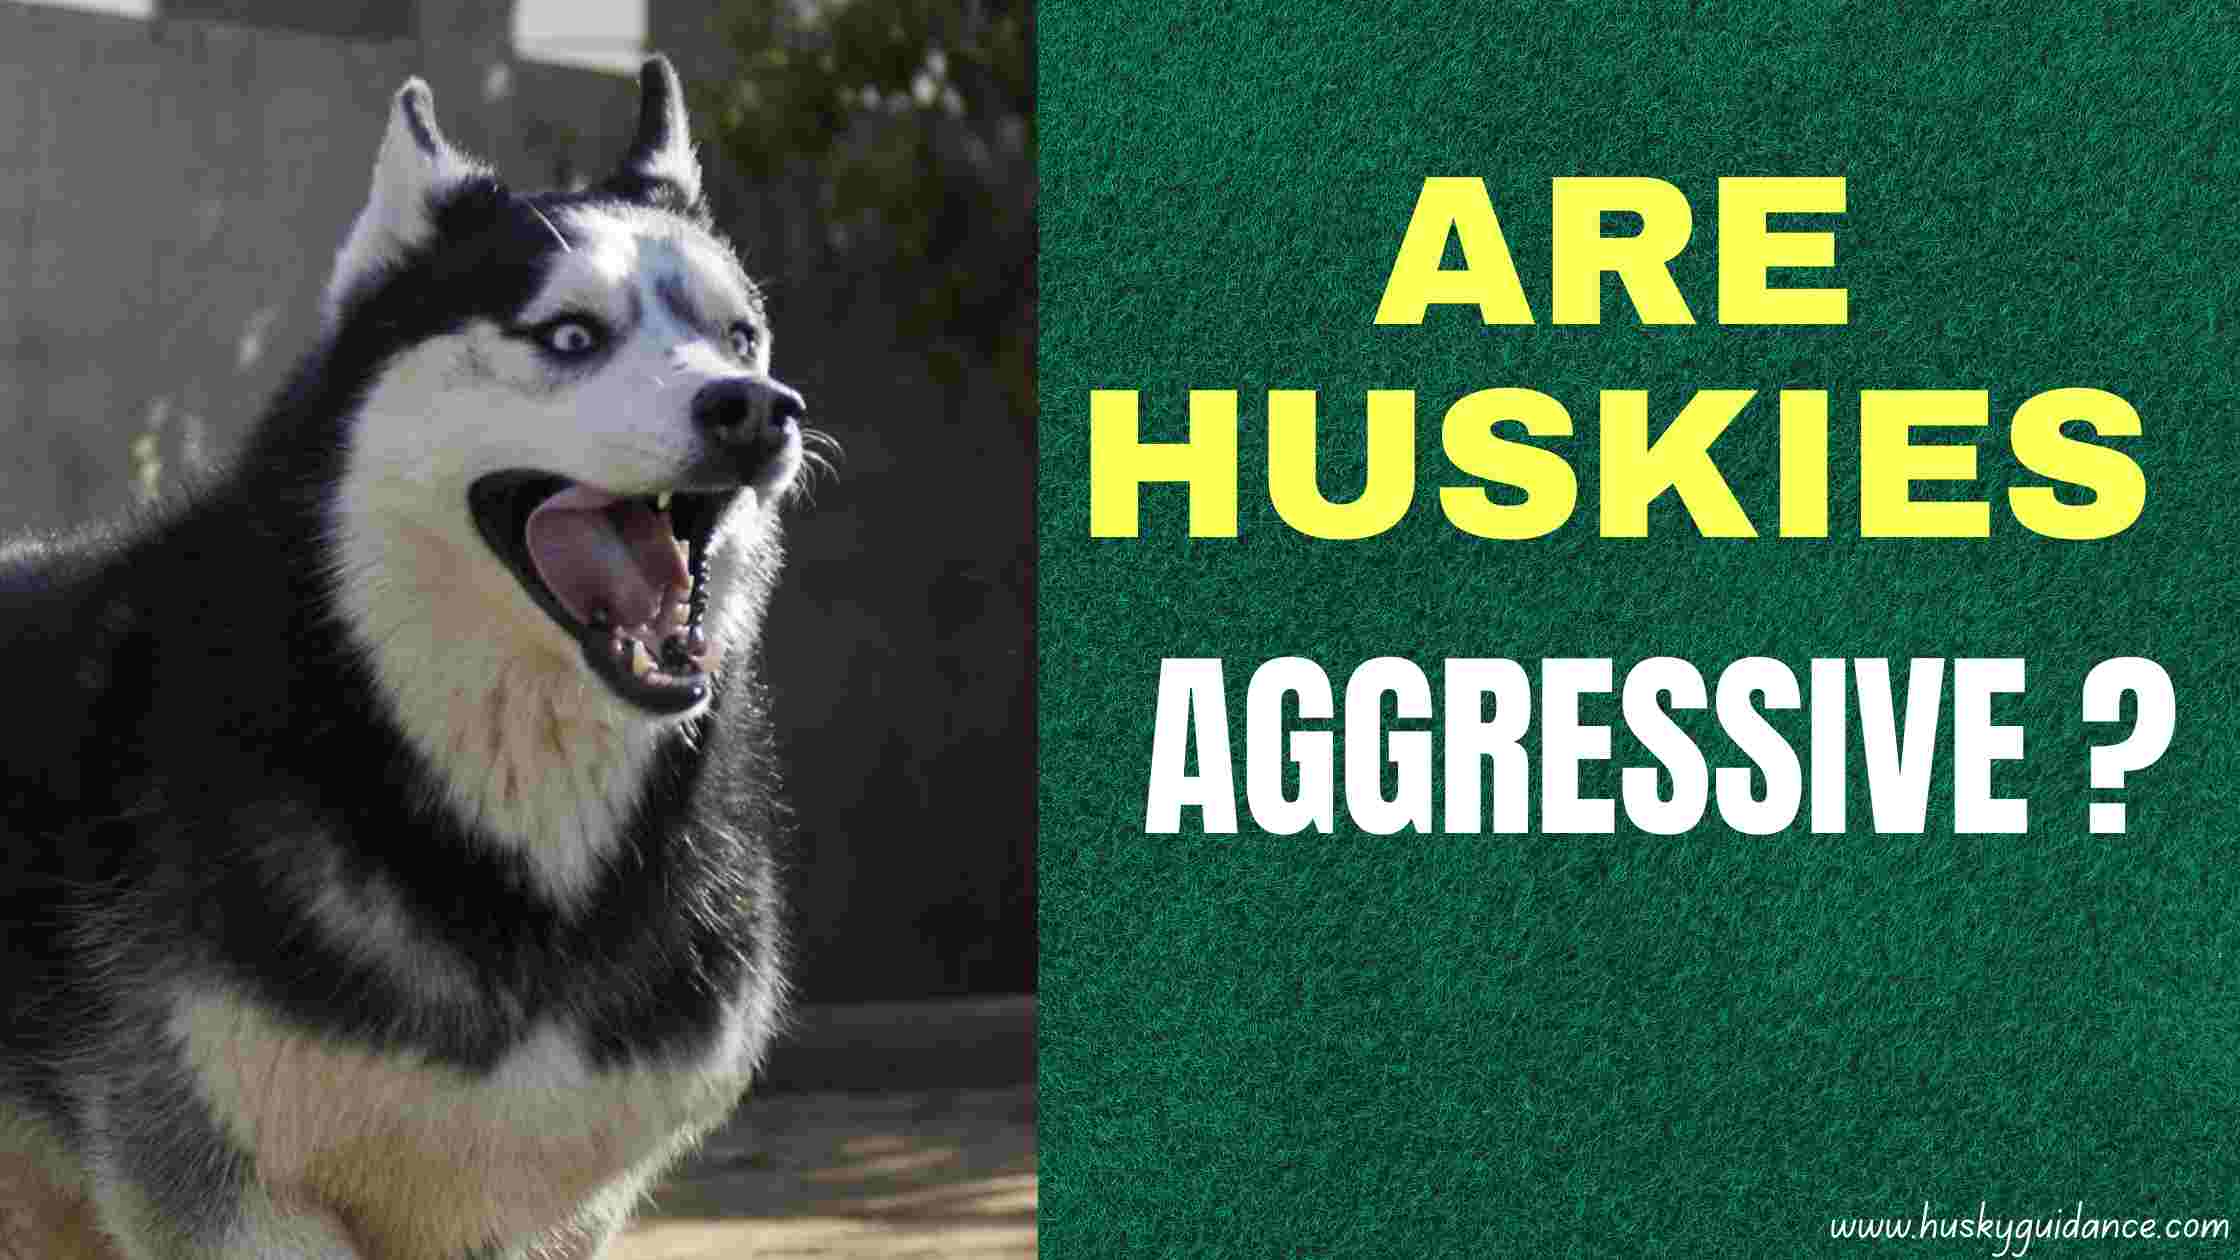 Are Huskies Aggressive in Nature